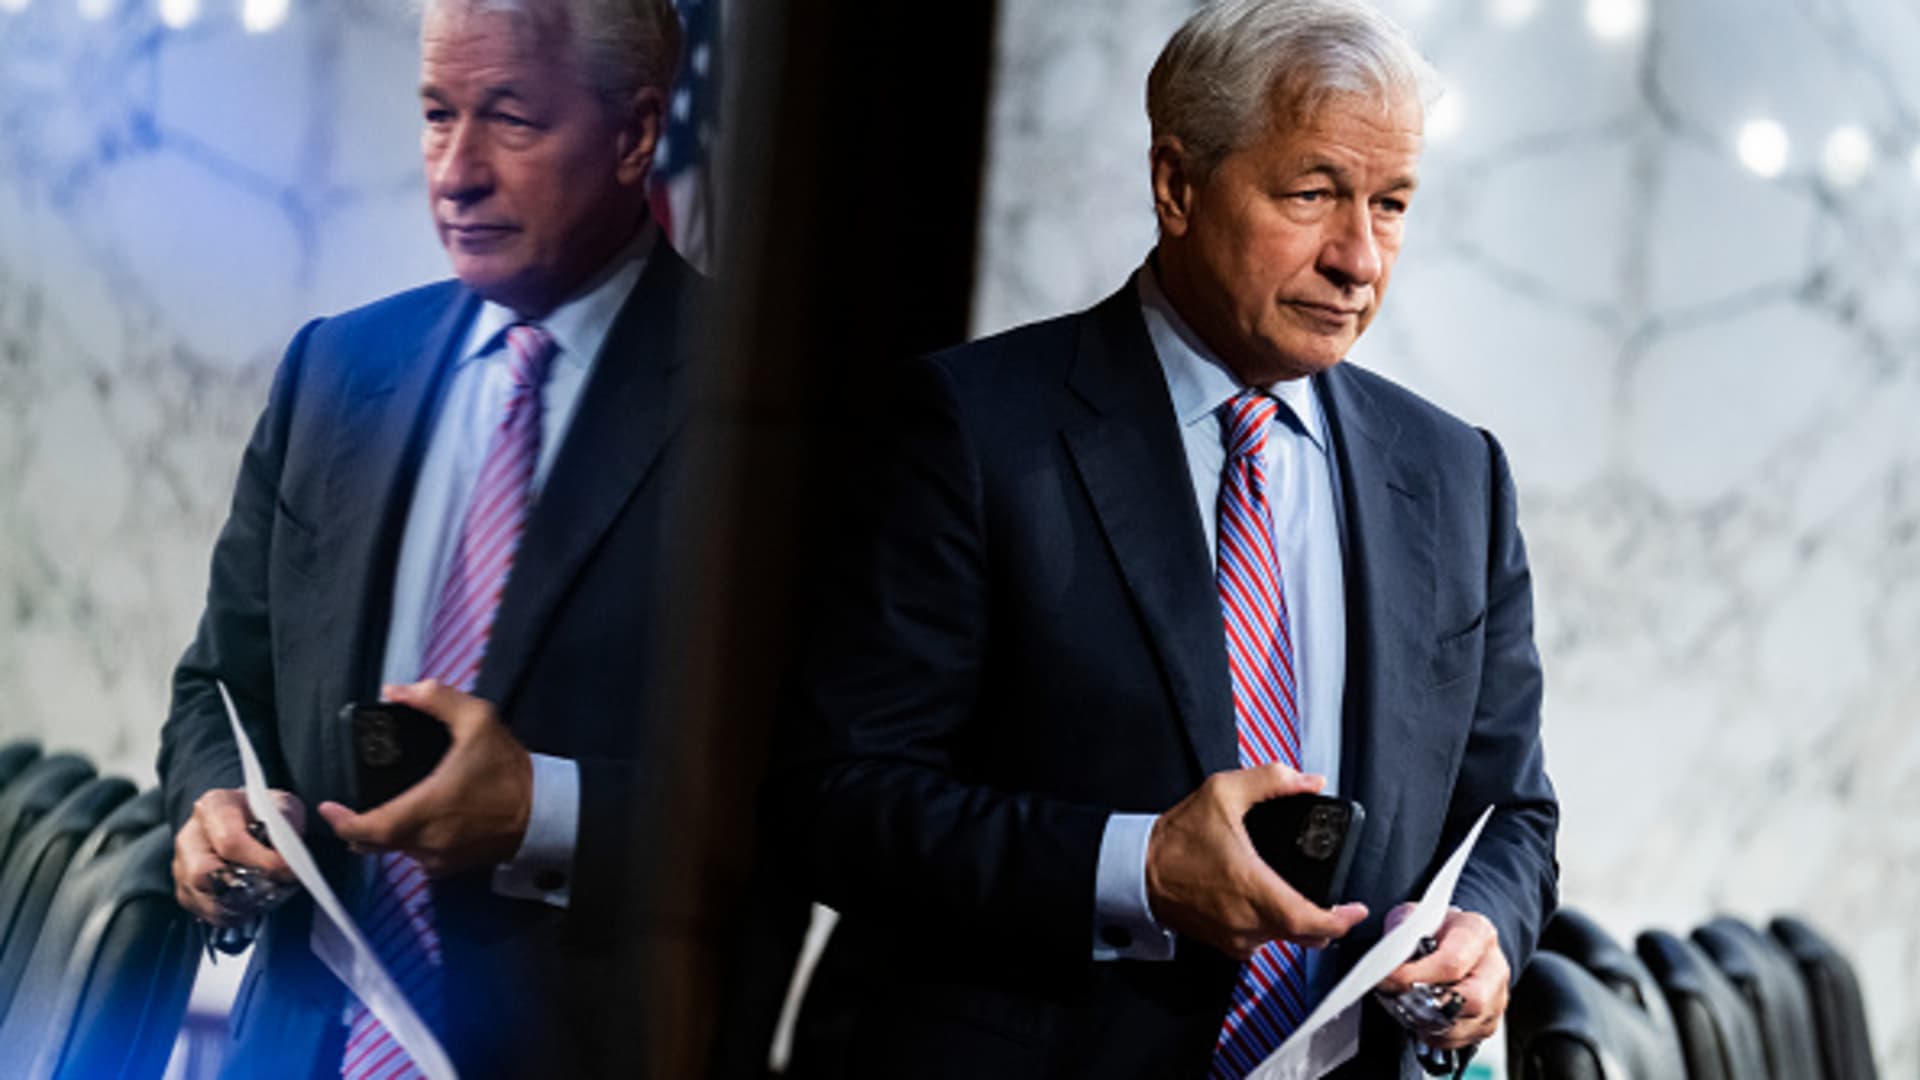 Jamie Dimon, CEO of JPMorgan Chase, arrives for the Senate Banking, Housing, and Urban Affairs Committee hearing titled Annual Oversight of the Nations Largest Banks, in Hart Building on Thursday, September 22, 2022.